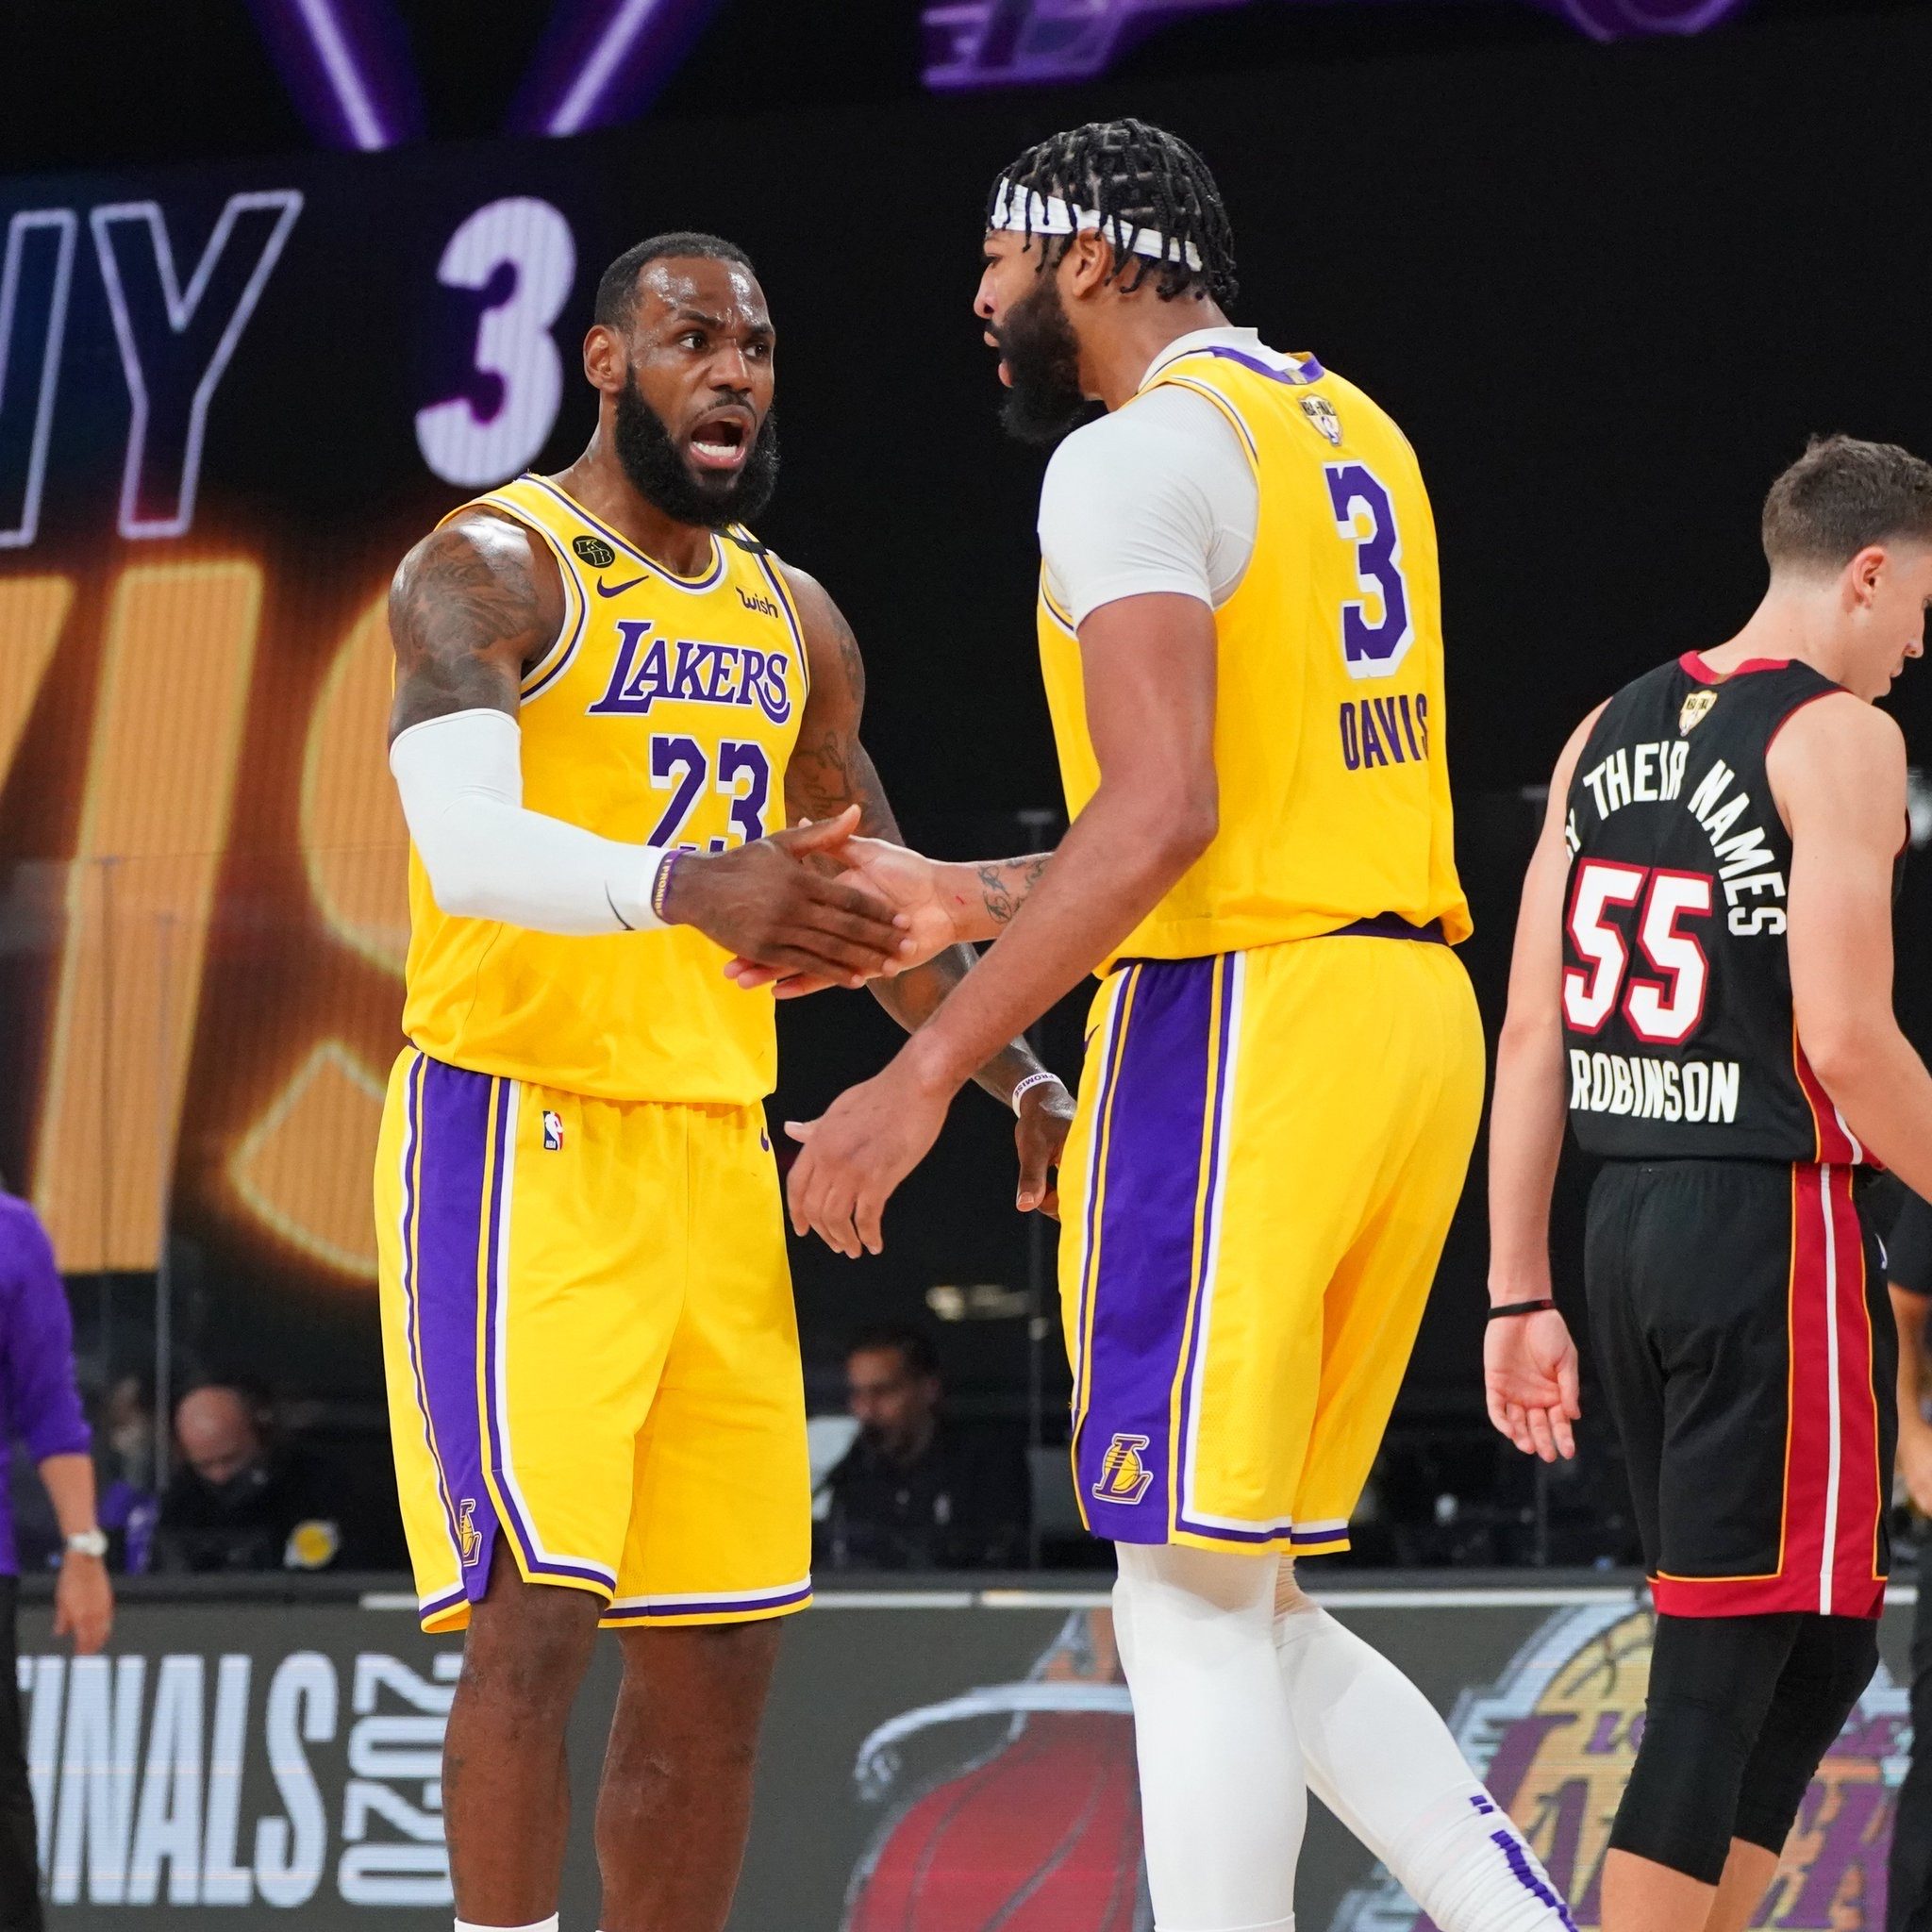 Dominance and verve: How the Lakers won Game 1